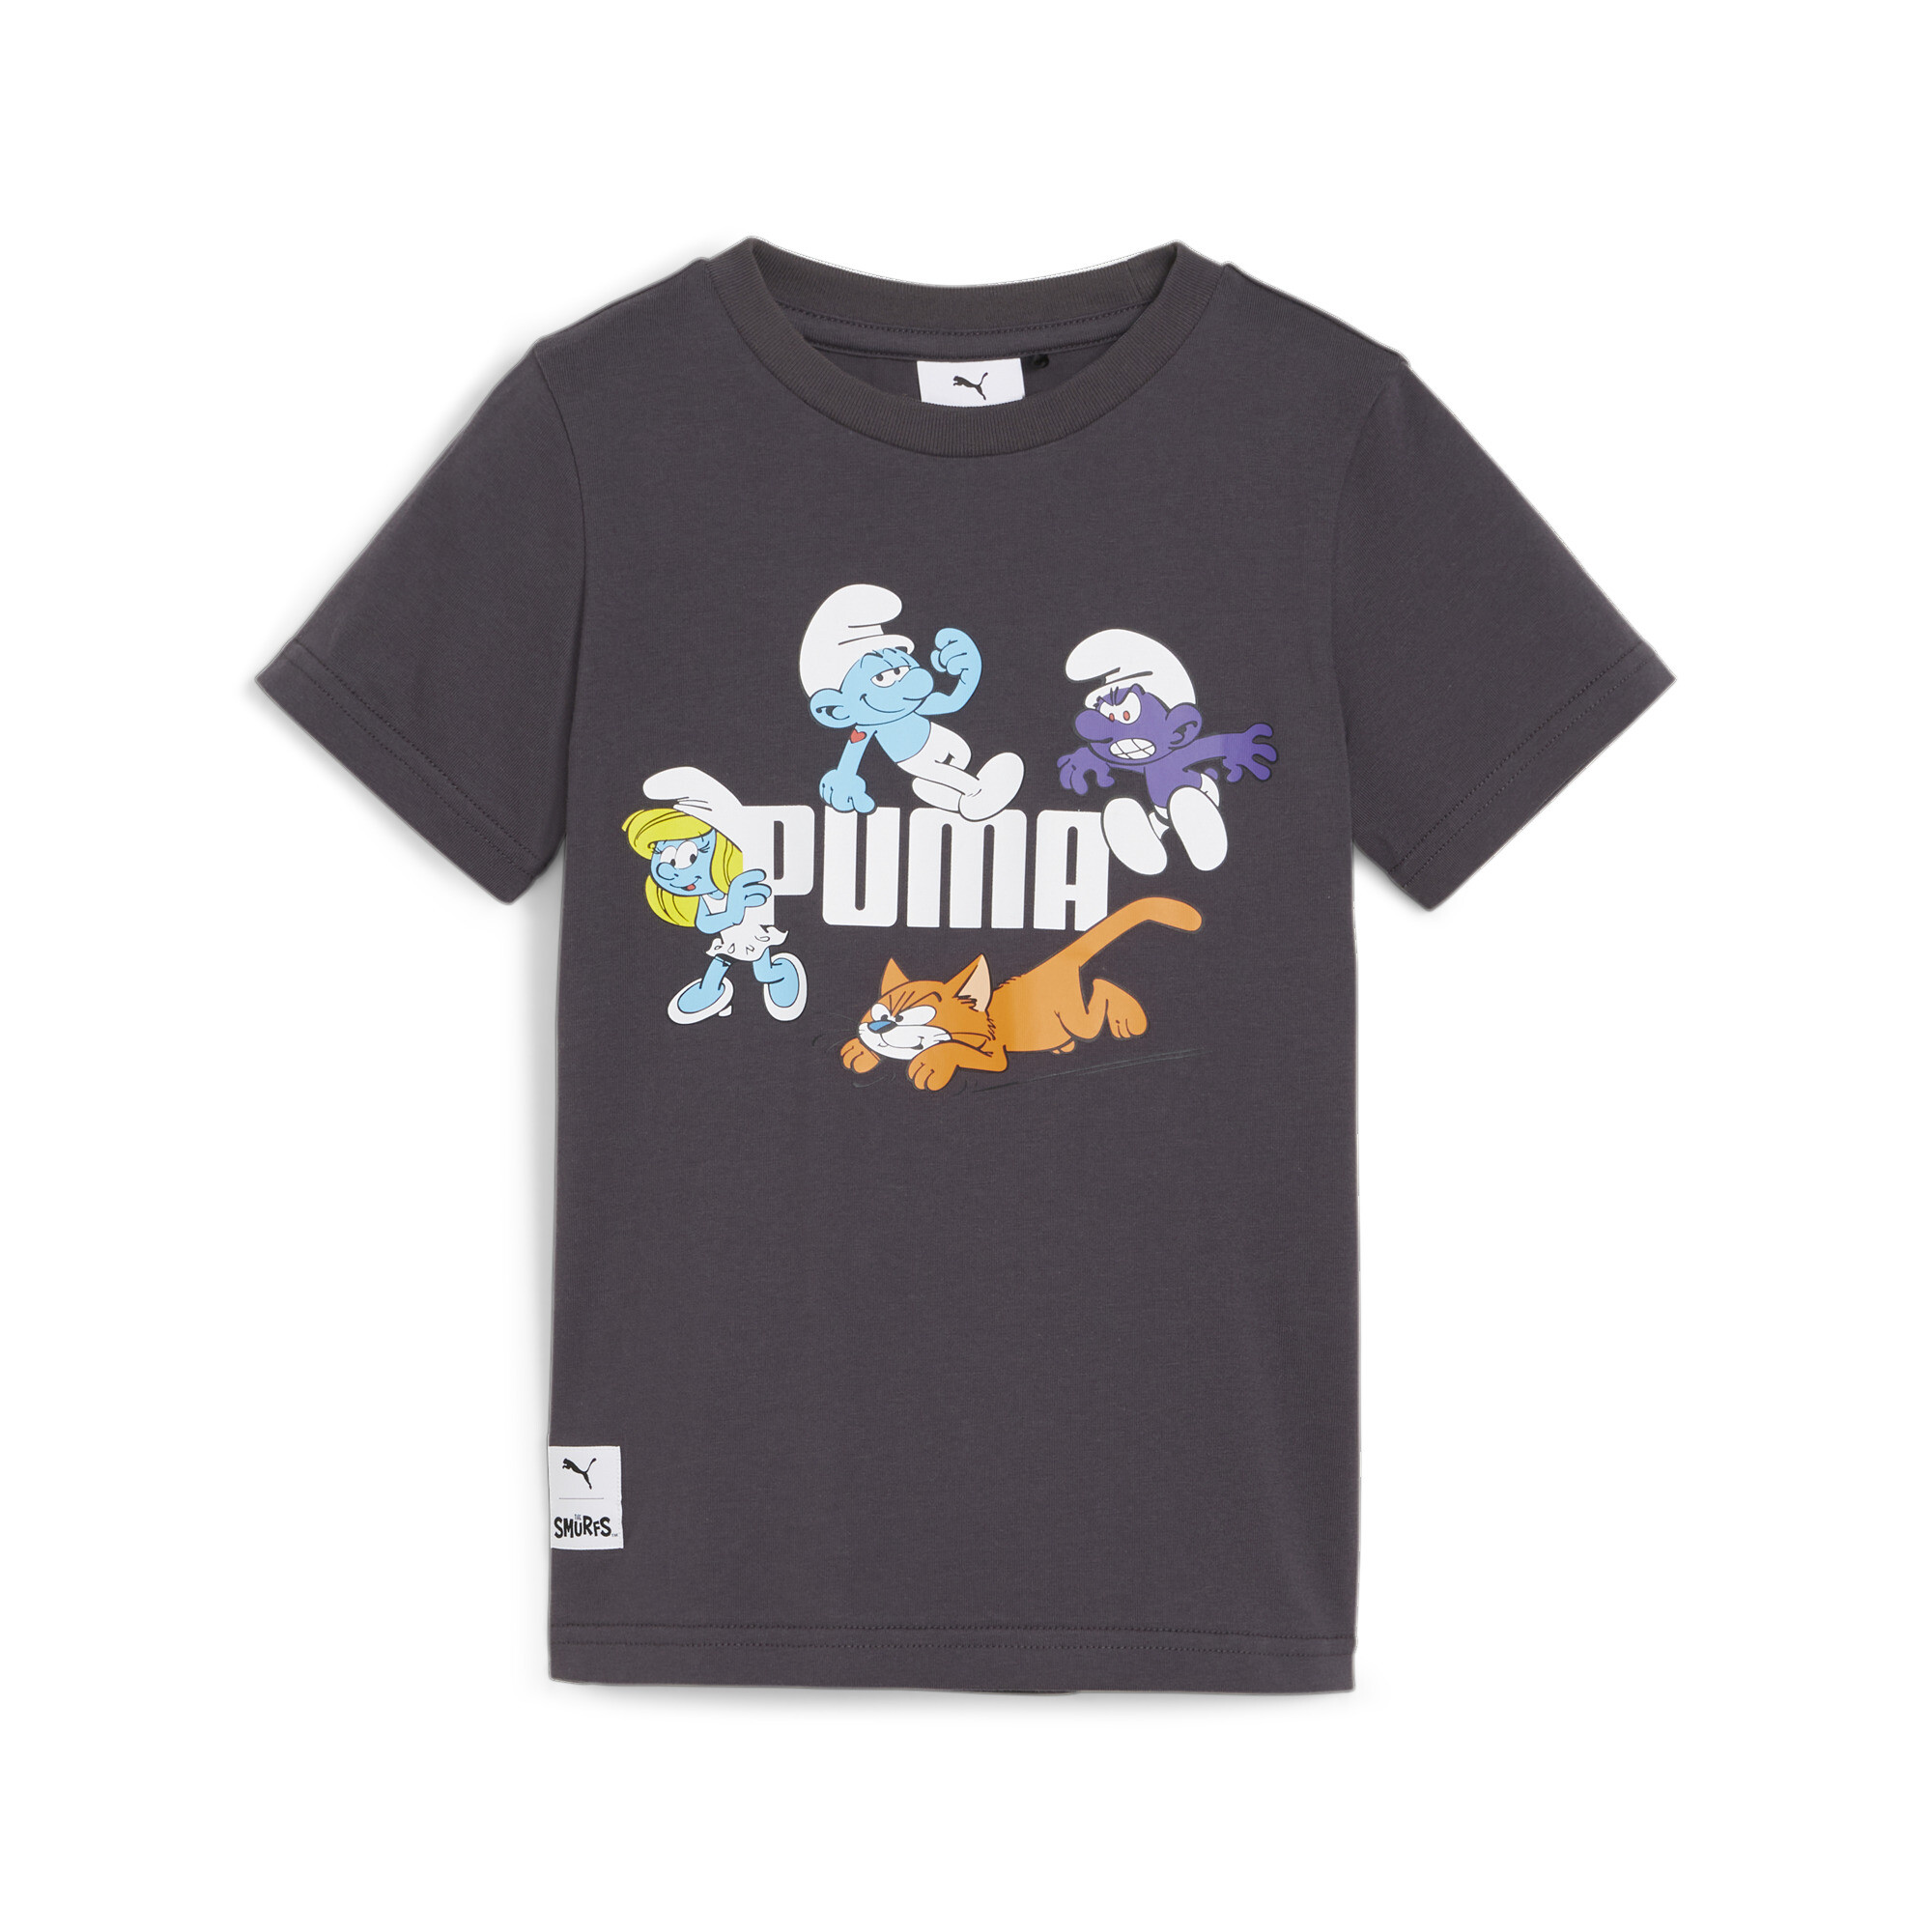 PUMA X THE SMURFS T-Shirt In Gray, Size 9-10 Youth